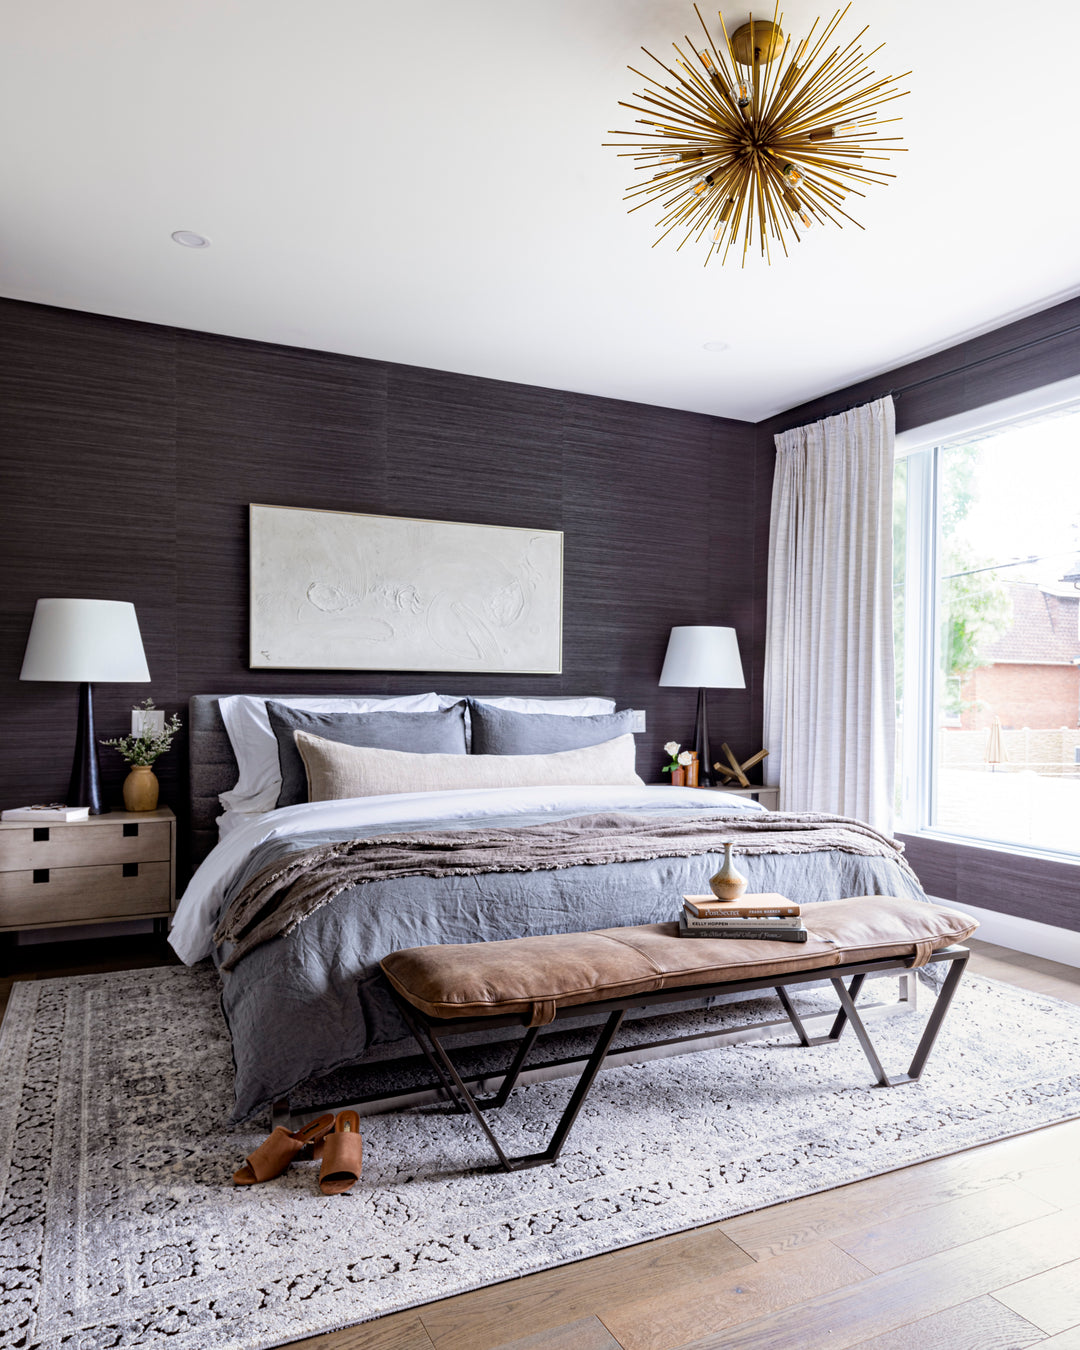 This master bedroom is spacious with dark tones coming through in the wallpaper, bedding, rug, and is enhanced with warm tones found in the light fixture, bench, and nightstands.